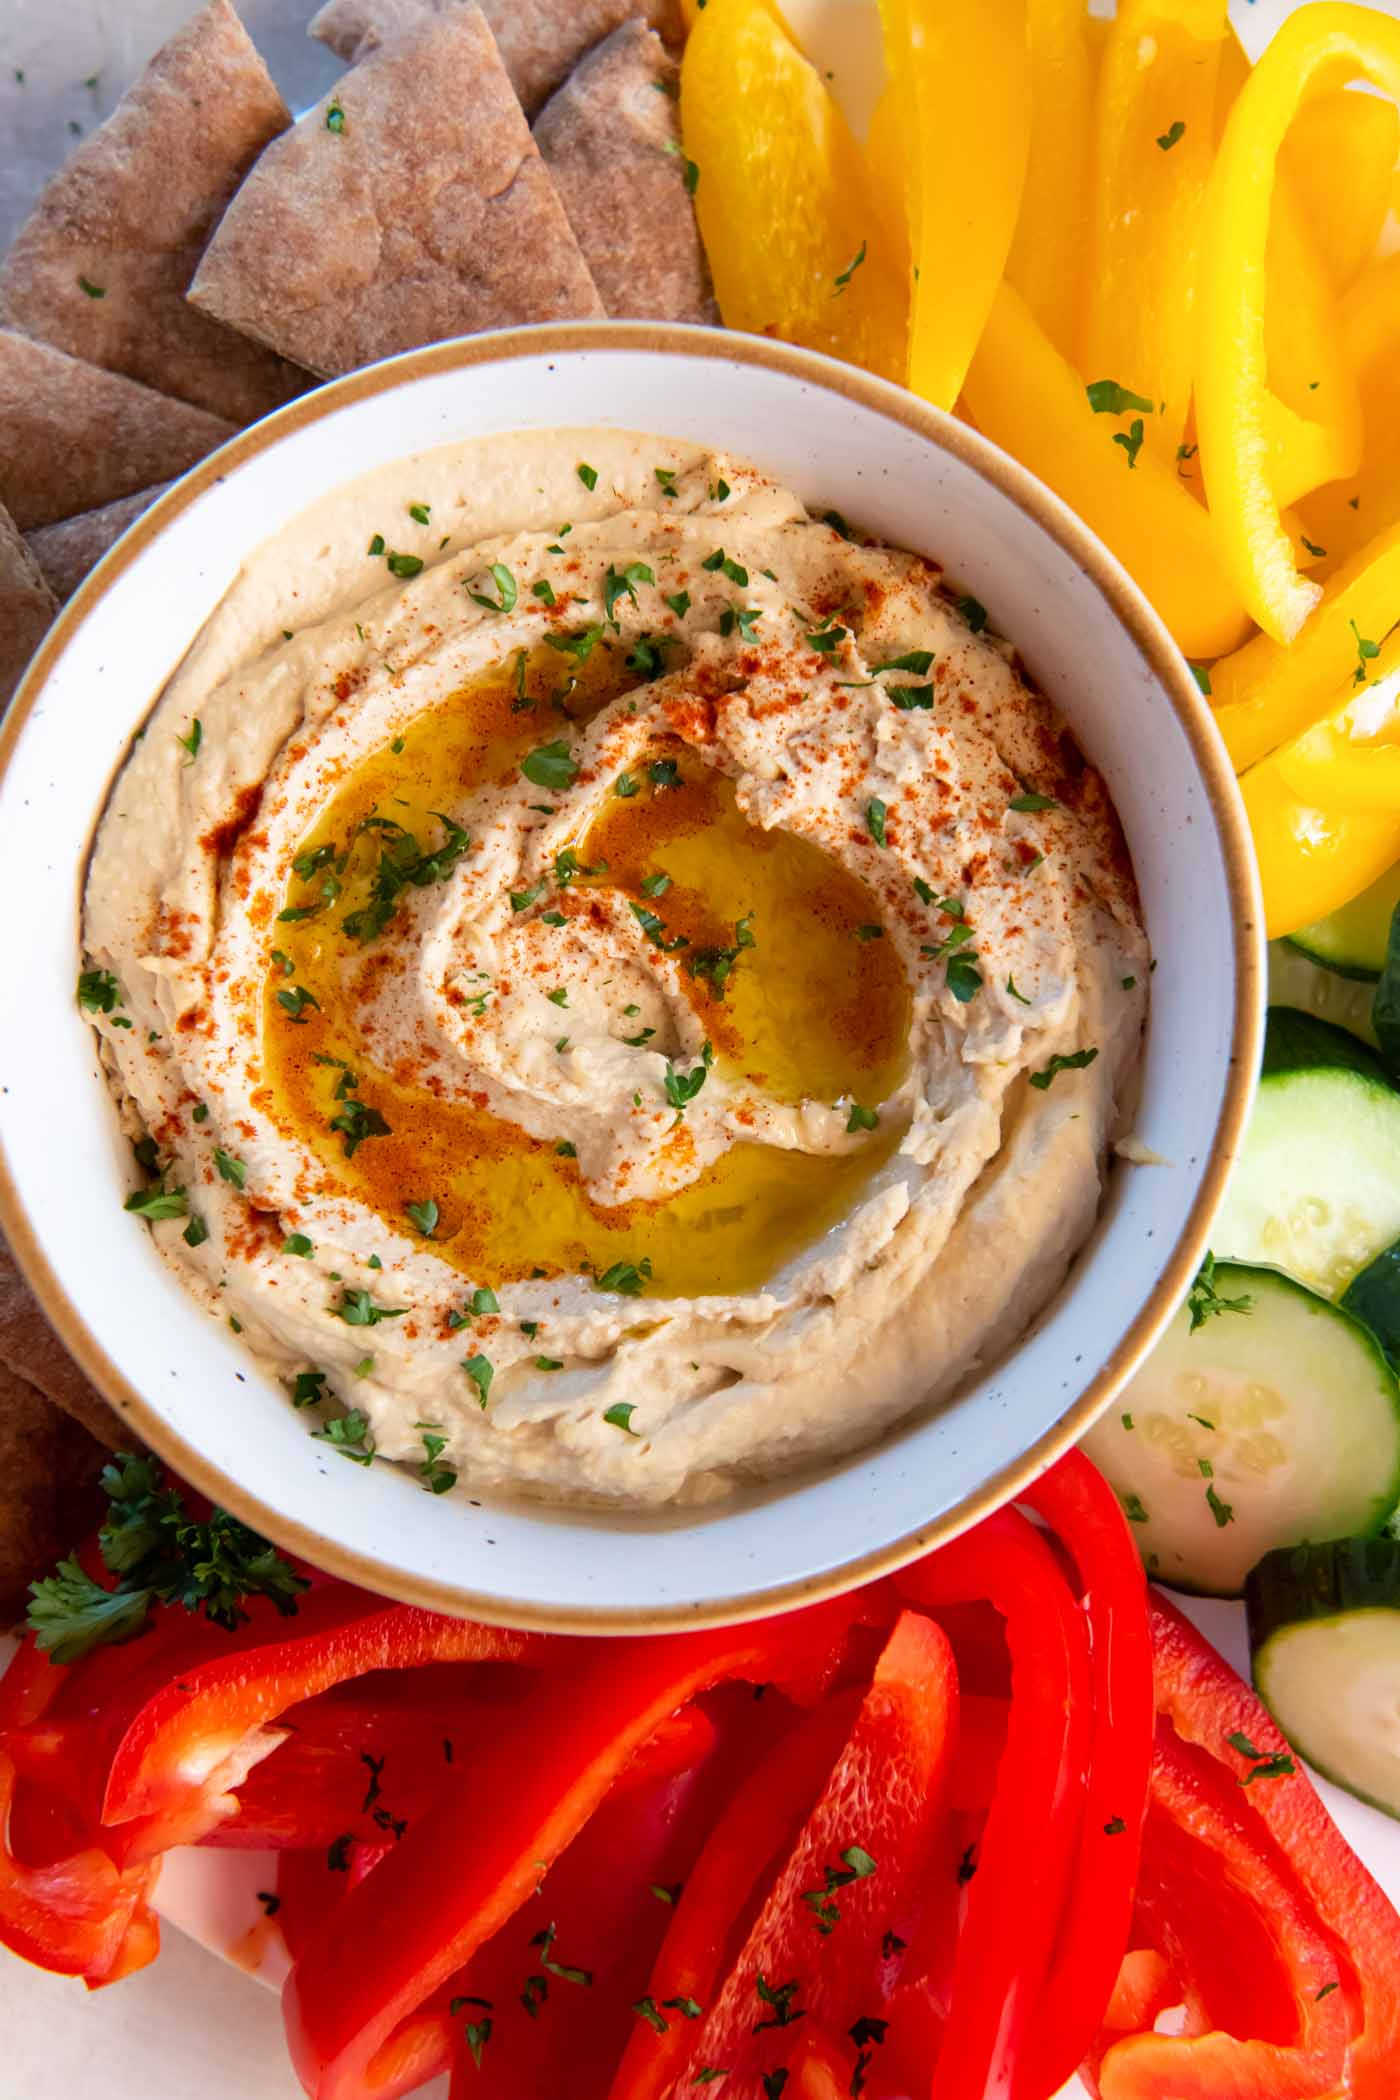 Hummus served in a bowl with sliced bell peppers, cucumber and pita bread around the bowl.